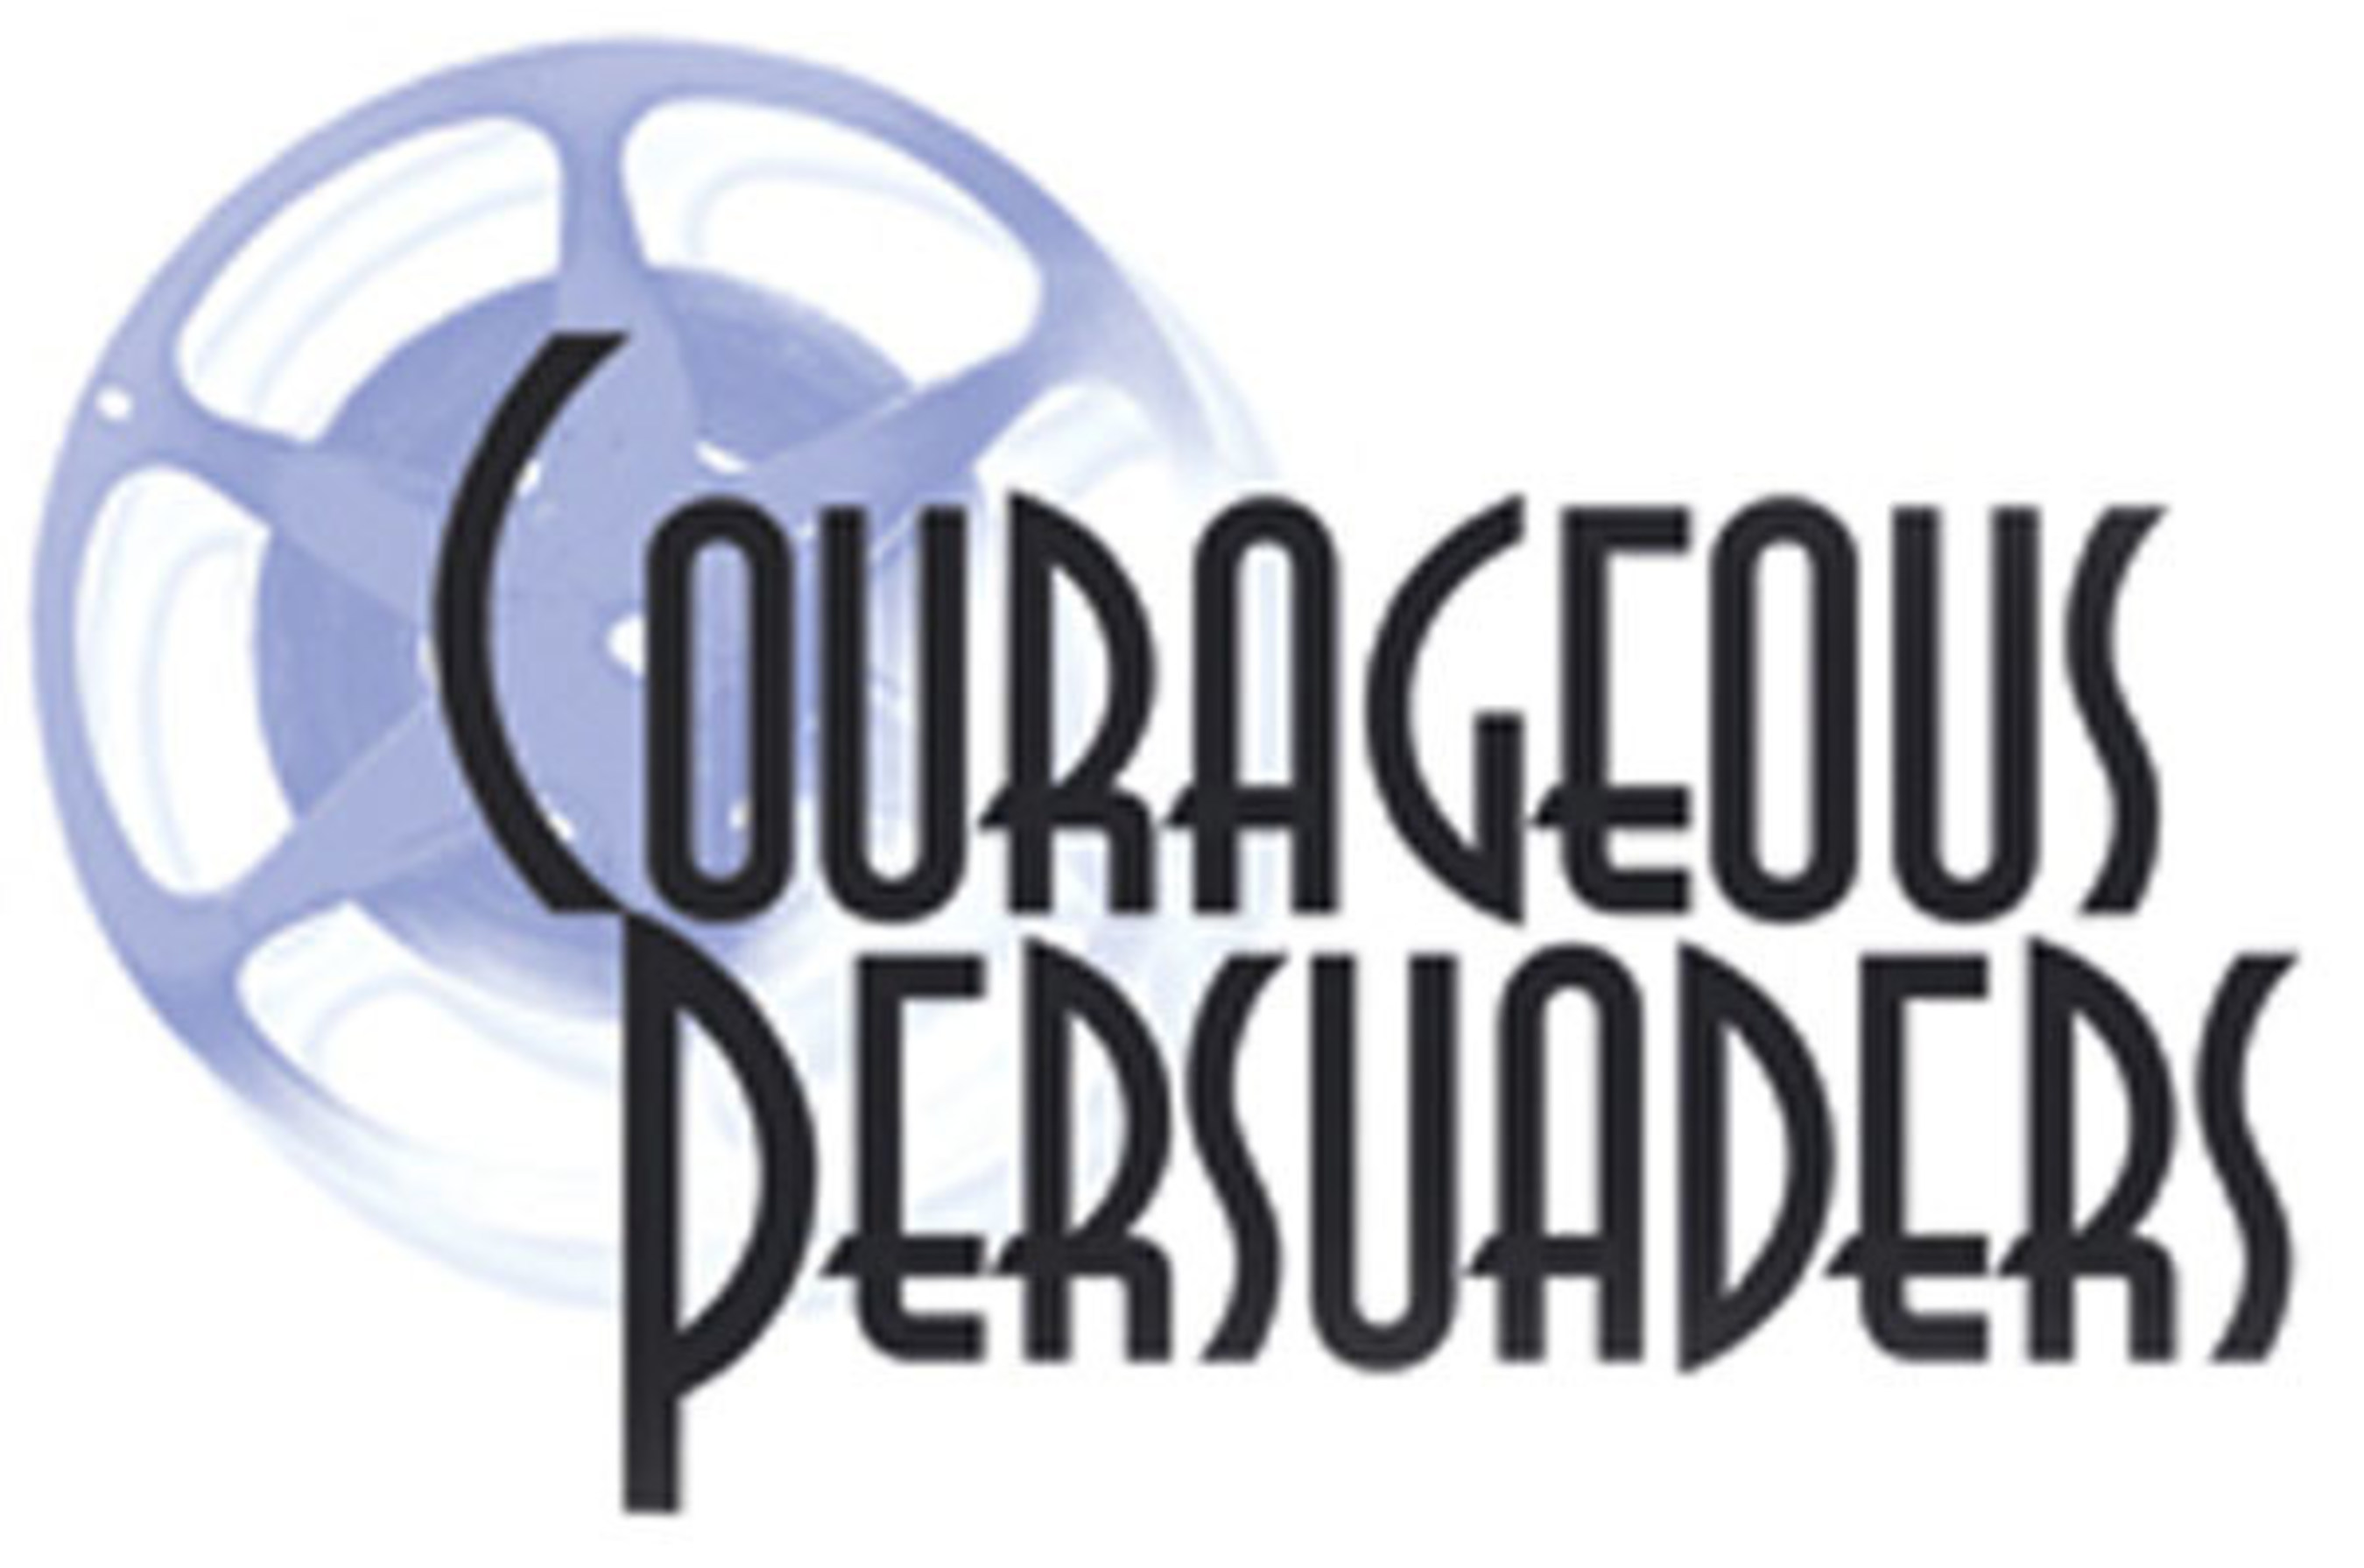 Courageous Persuaders